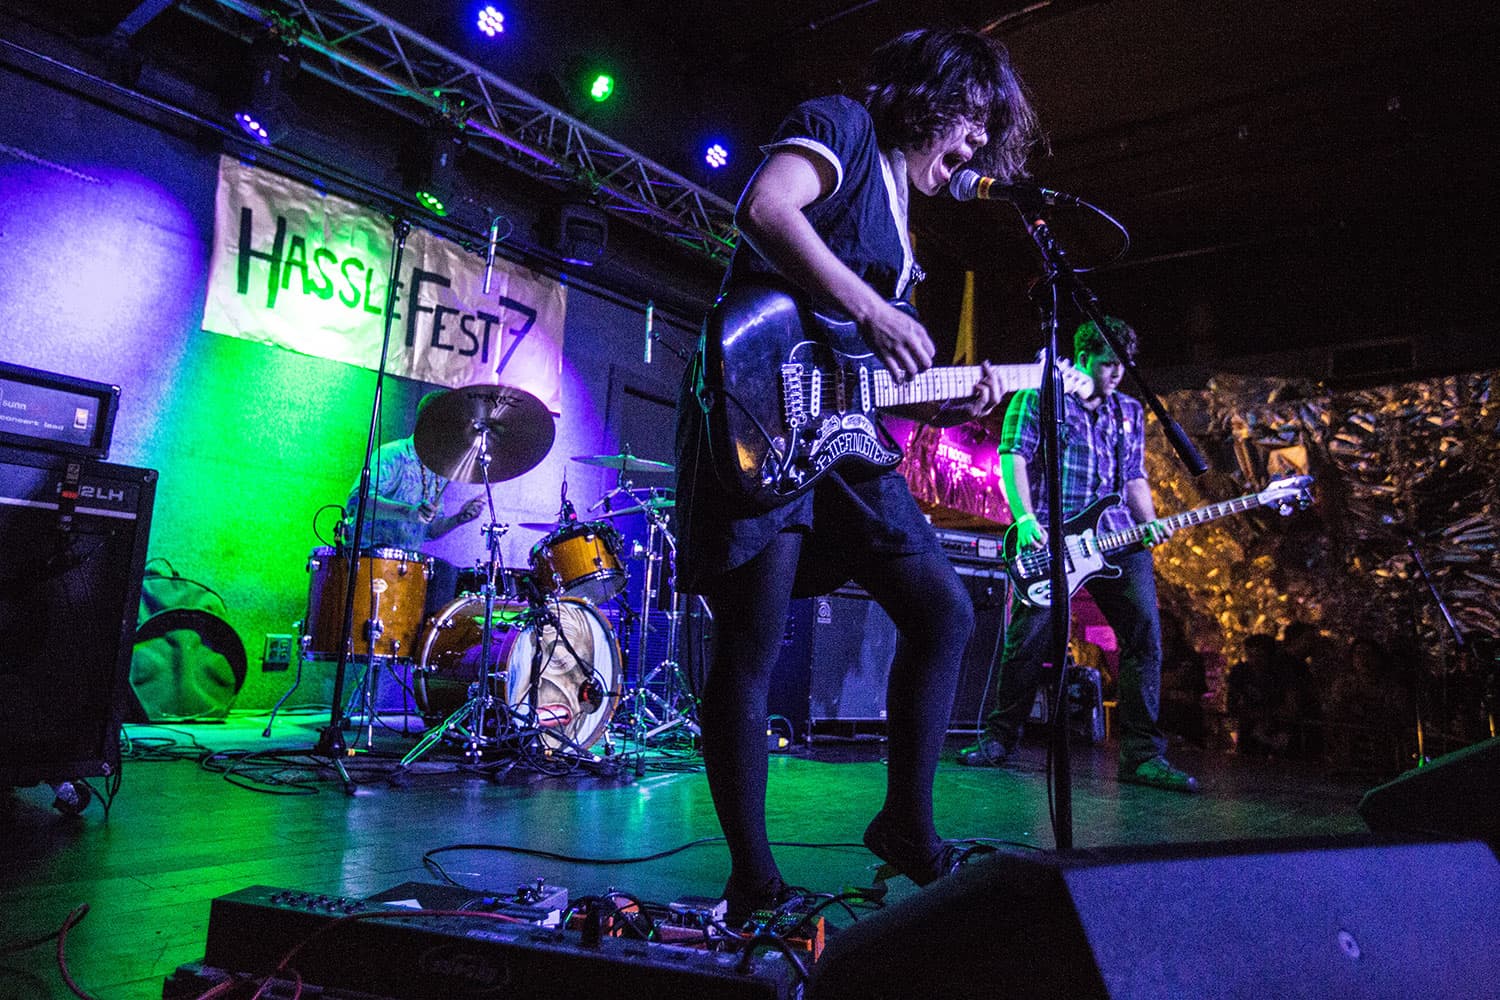 Screaming Females performed at HassleFest 7 in 2015. (Courtesy Ben Stas)